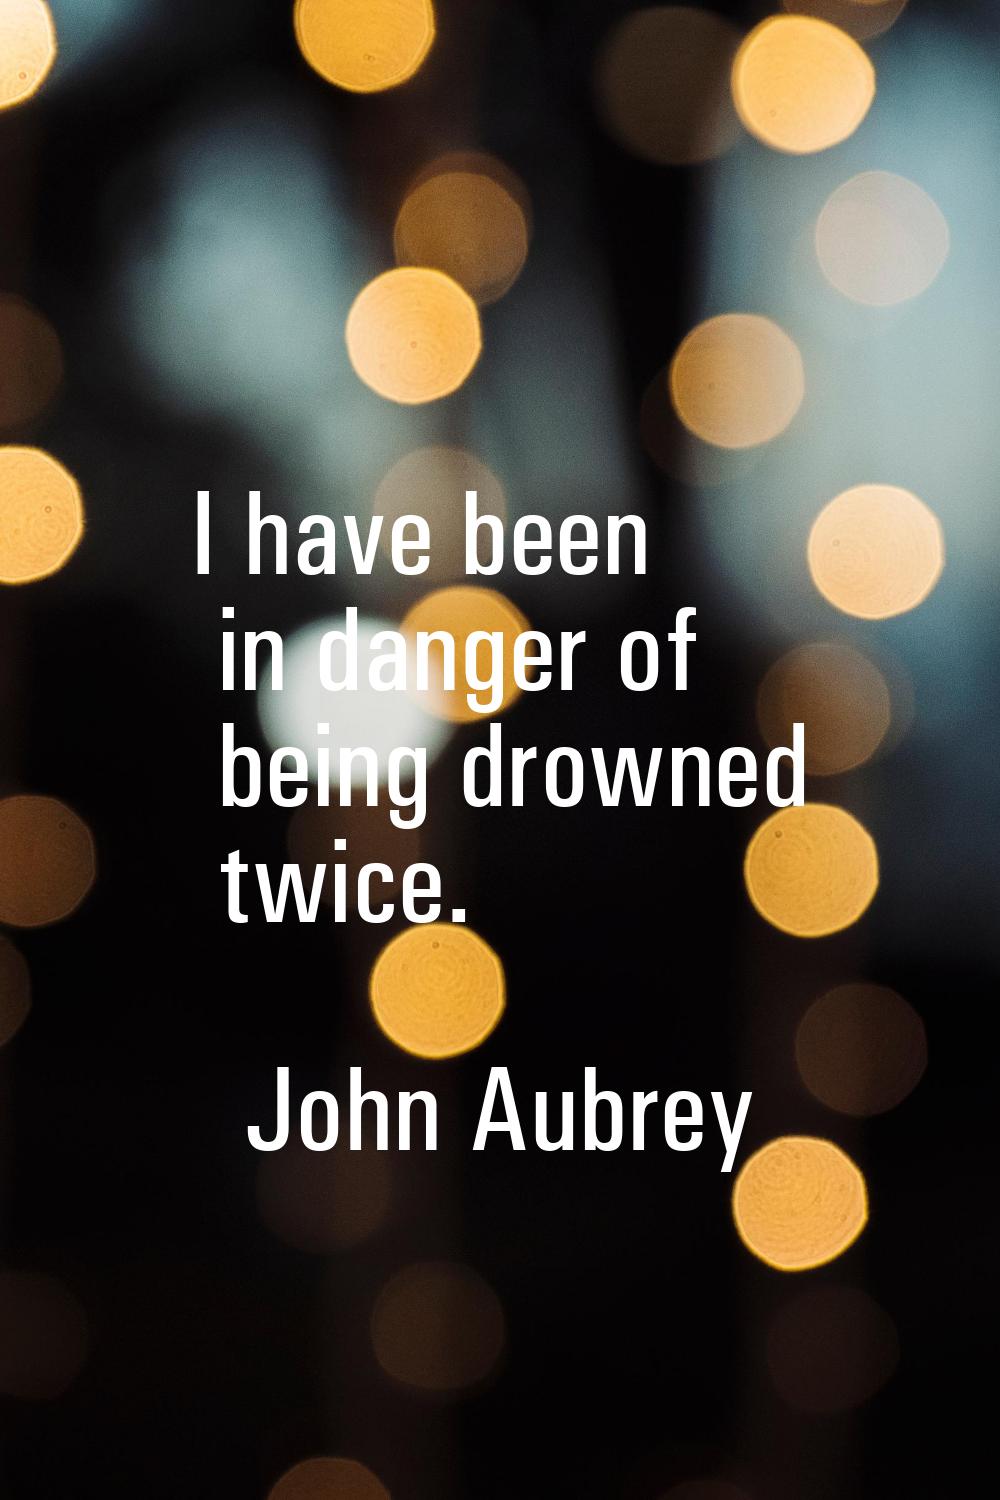 I have been in danger of being drowned twice.